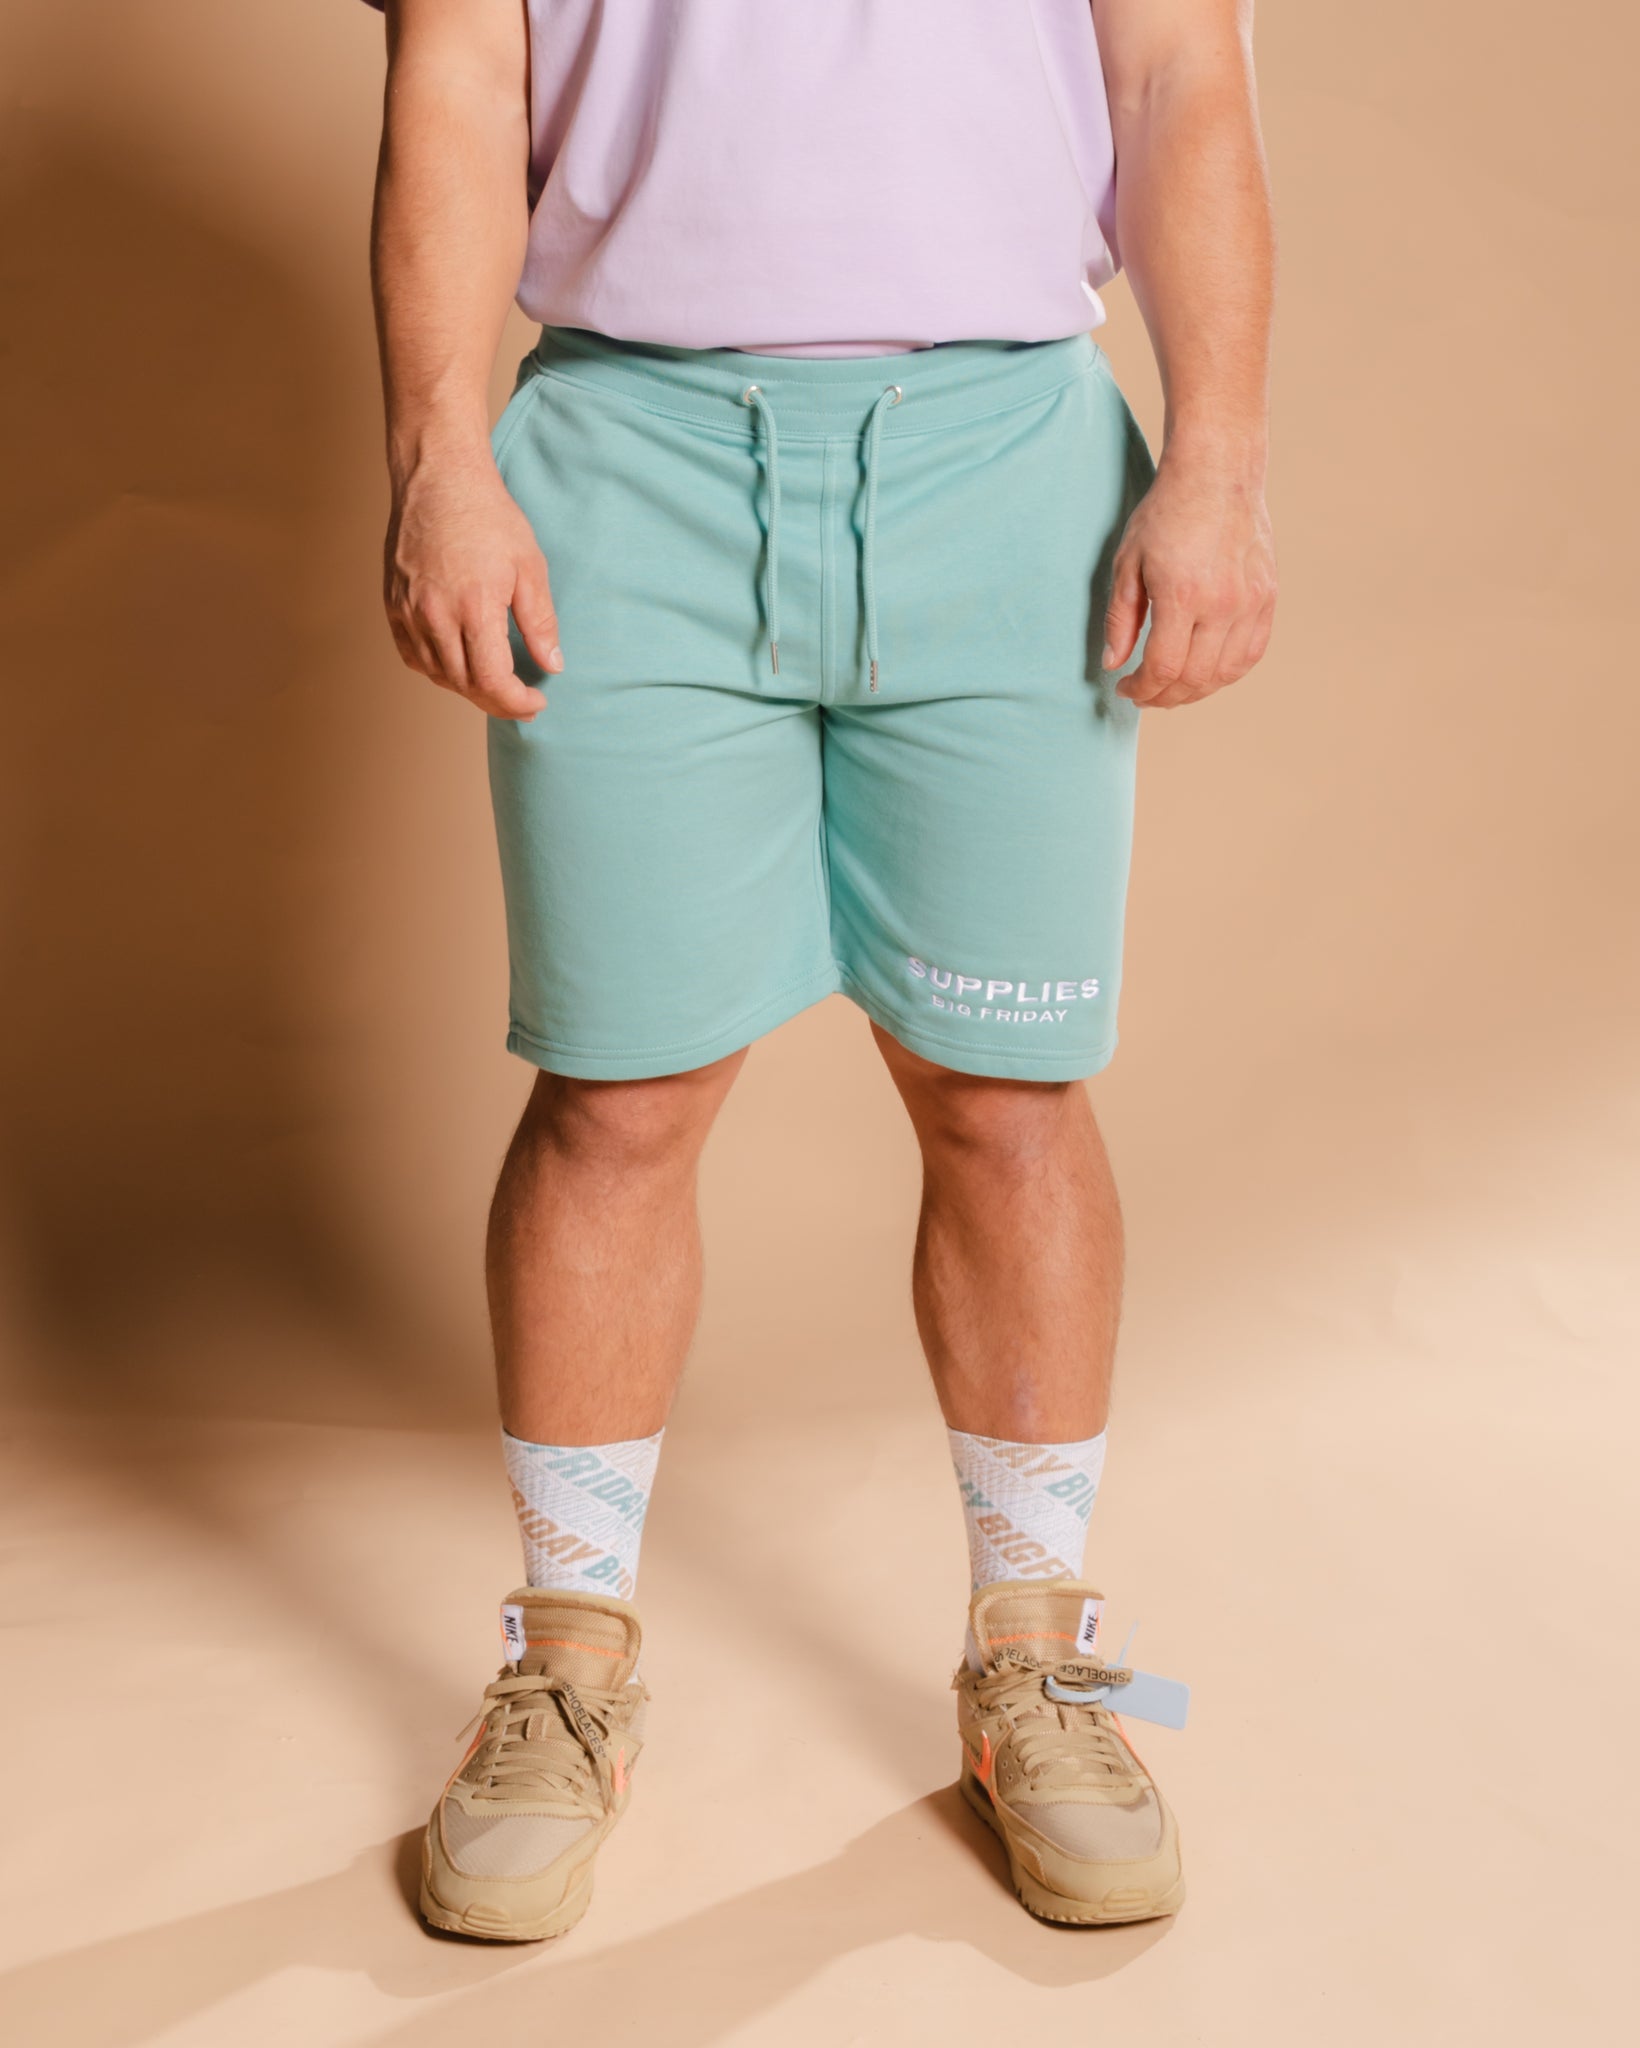 Teal Unisex Casuals Shorts